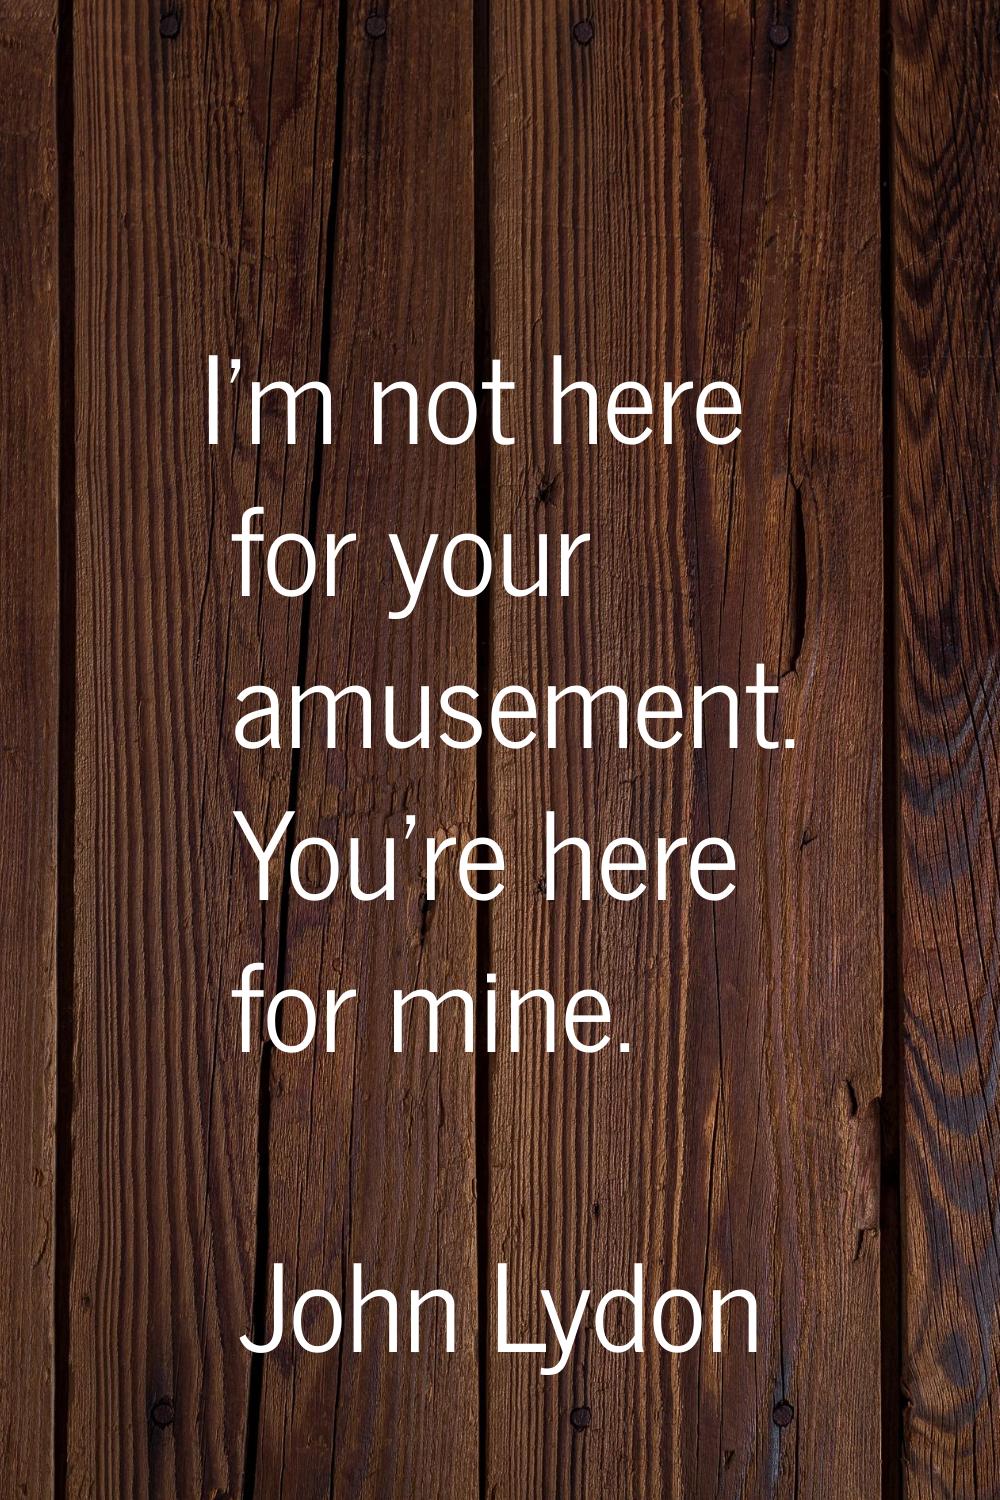 I'm not here for your amusement. You're here for mine.